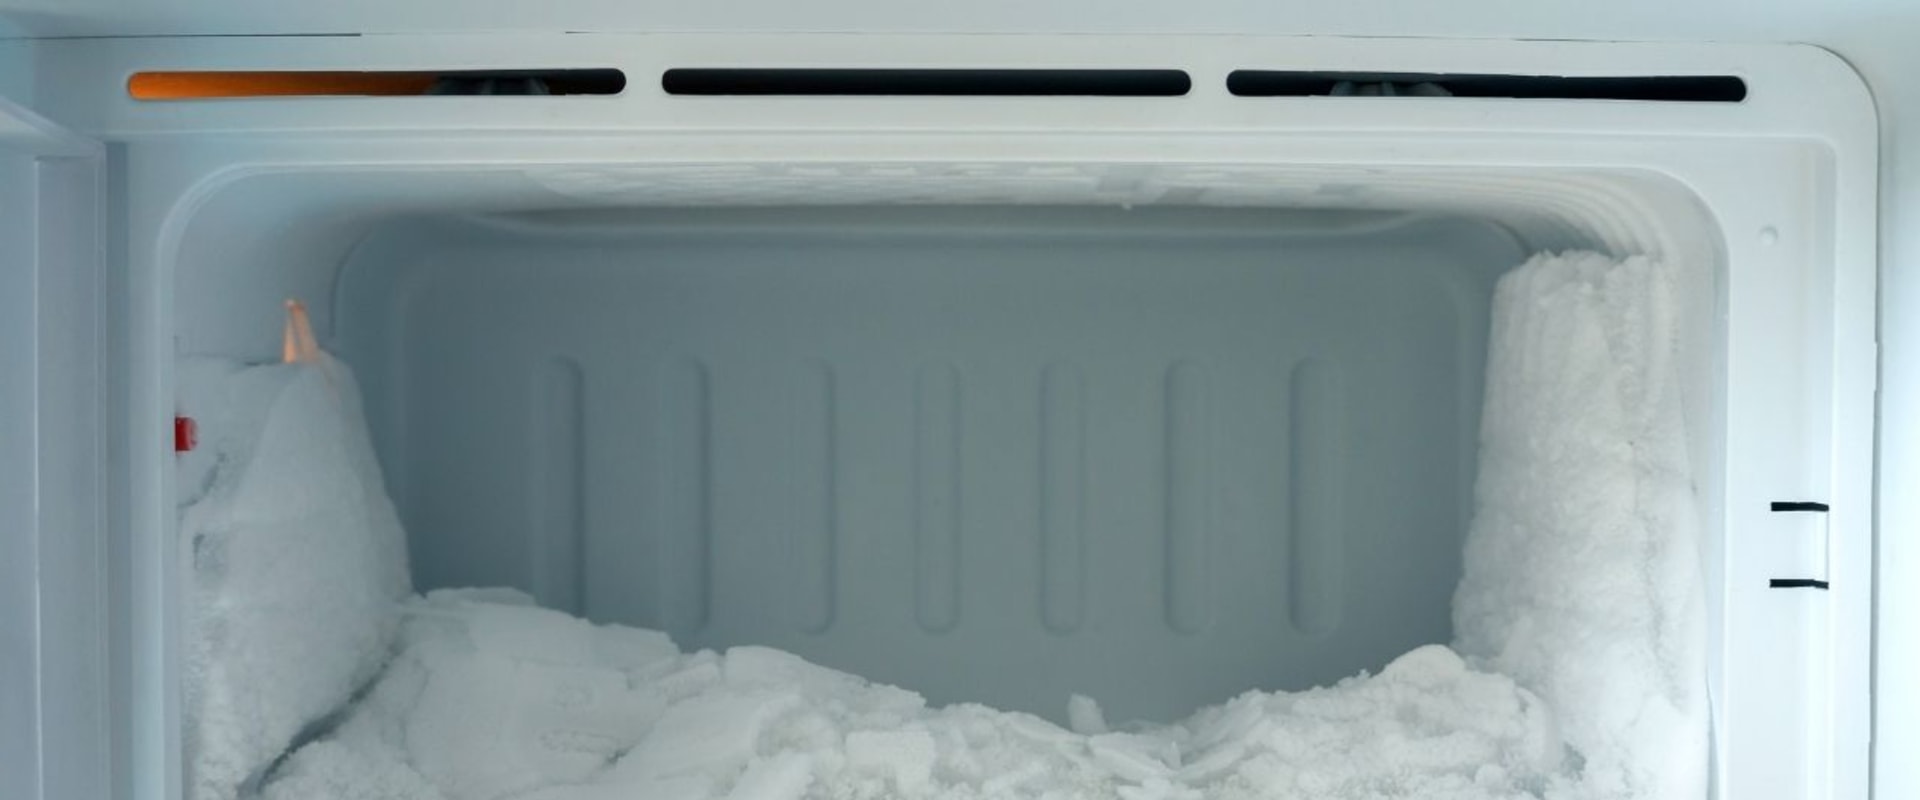 Troubleshooting a Non-Functioning Freezer: What to Look For